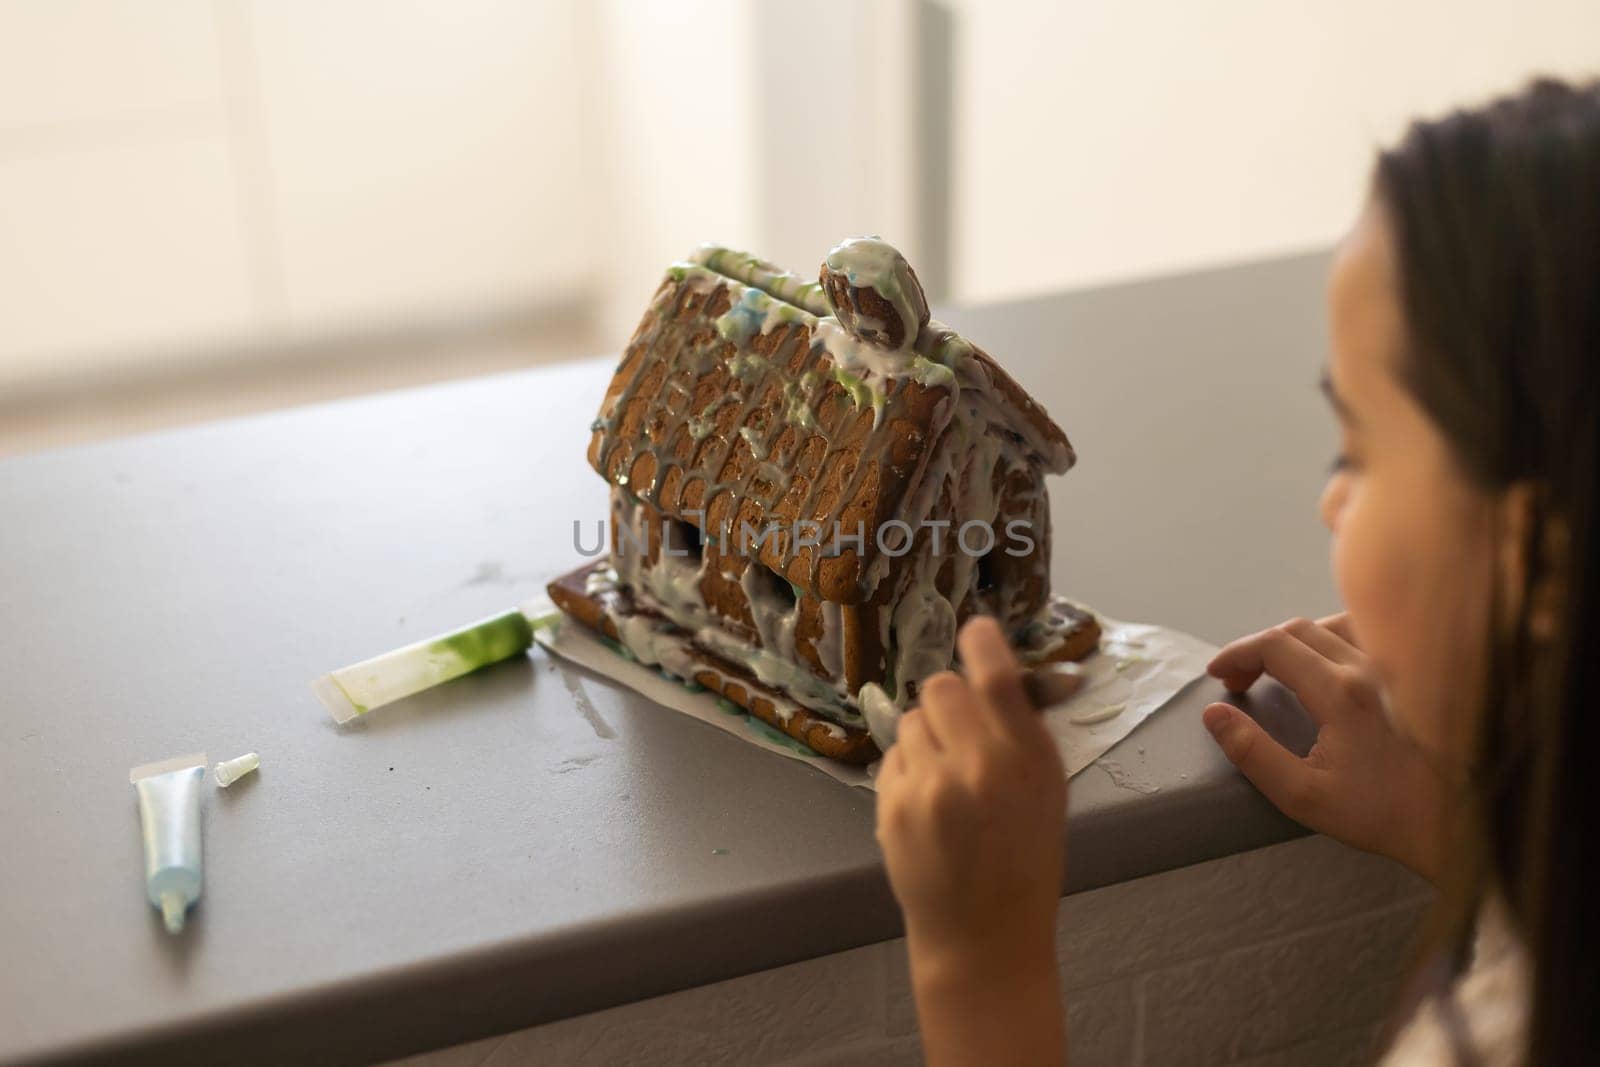 A girl plays with a gingerbread house for traditional Christmas decoration by Andelov13